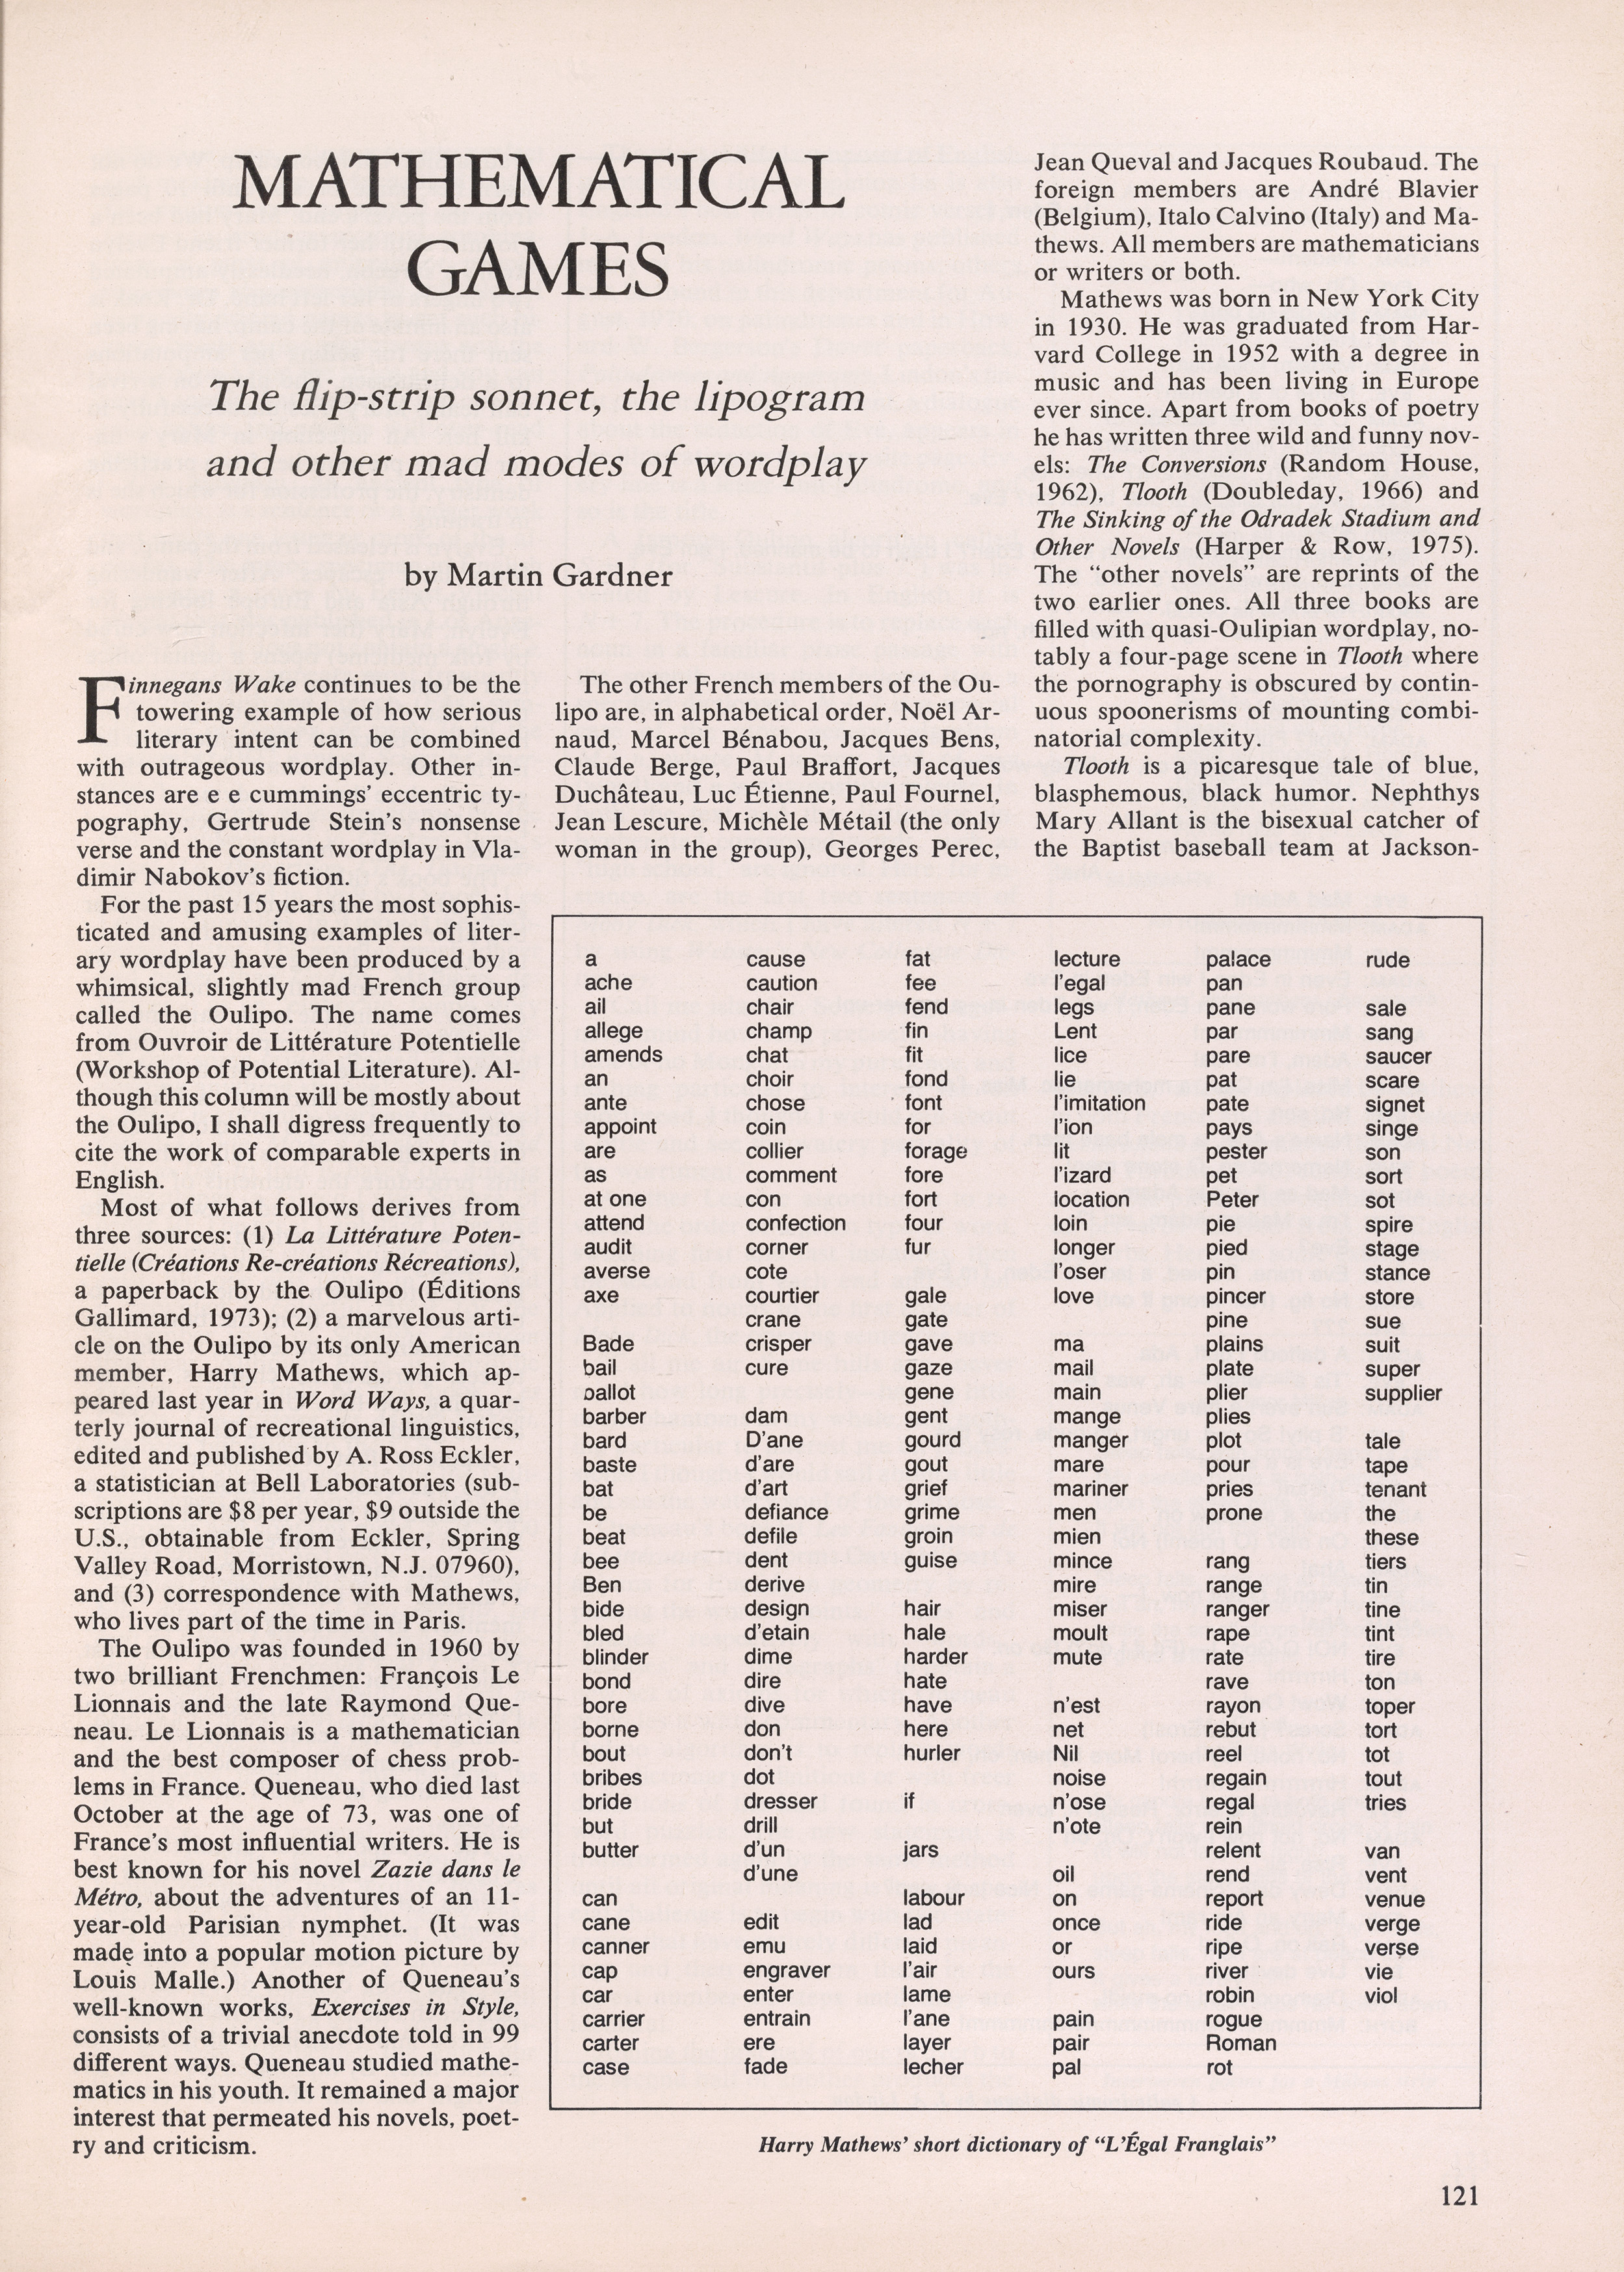 Mathews Corpus, as printed in the “Mathematical Games” column by Martin Gardner, Scientific American, February 1977